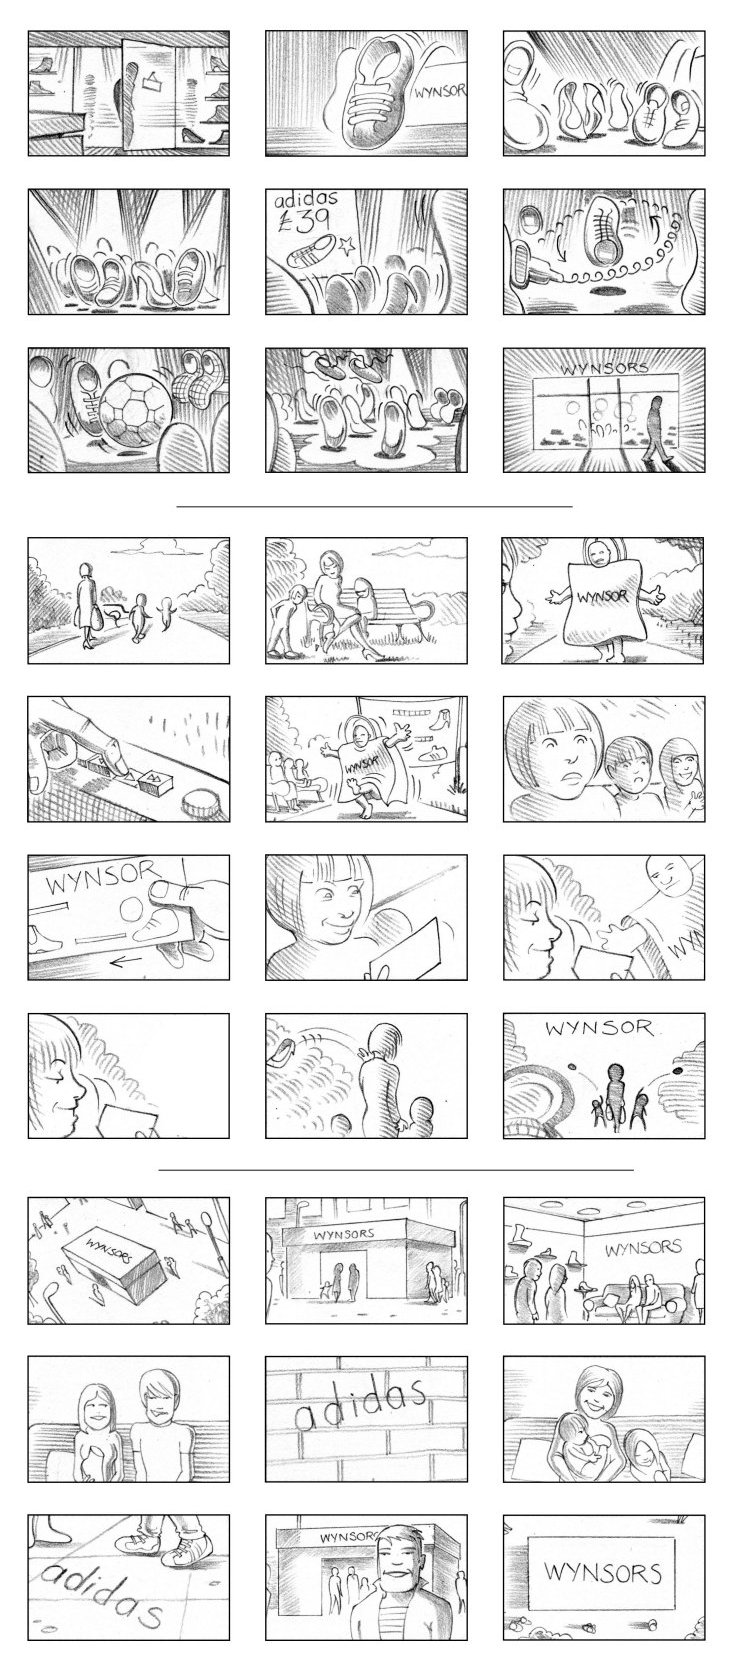 WYNSORS SHOES STORYBOARD BY ANDY SPARROW